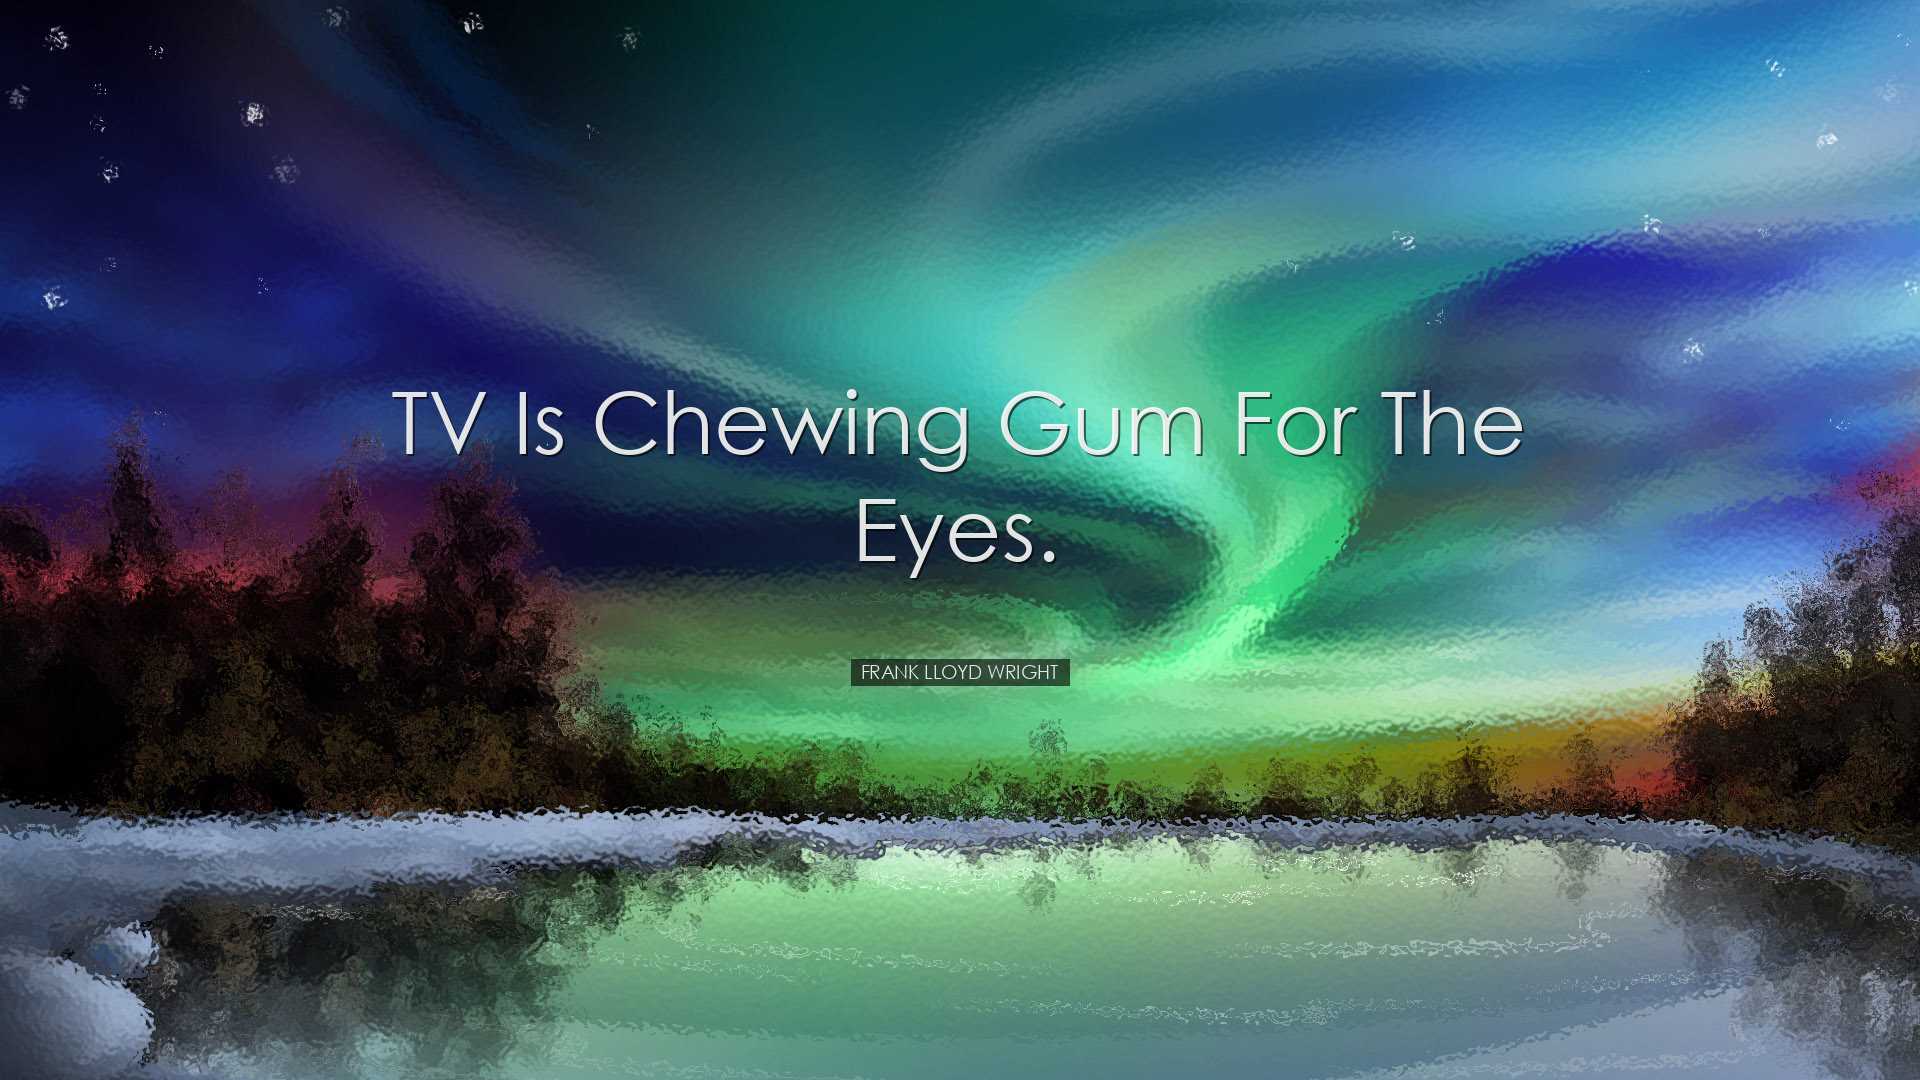 TV is chewing gum for the eyes. - Frank Lloyd Wright